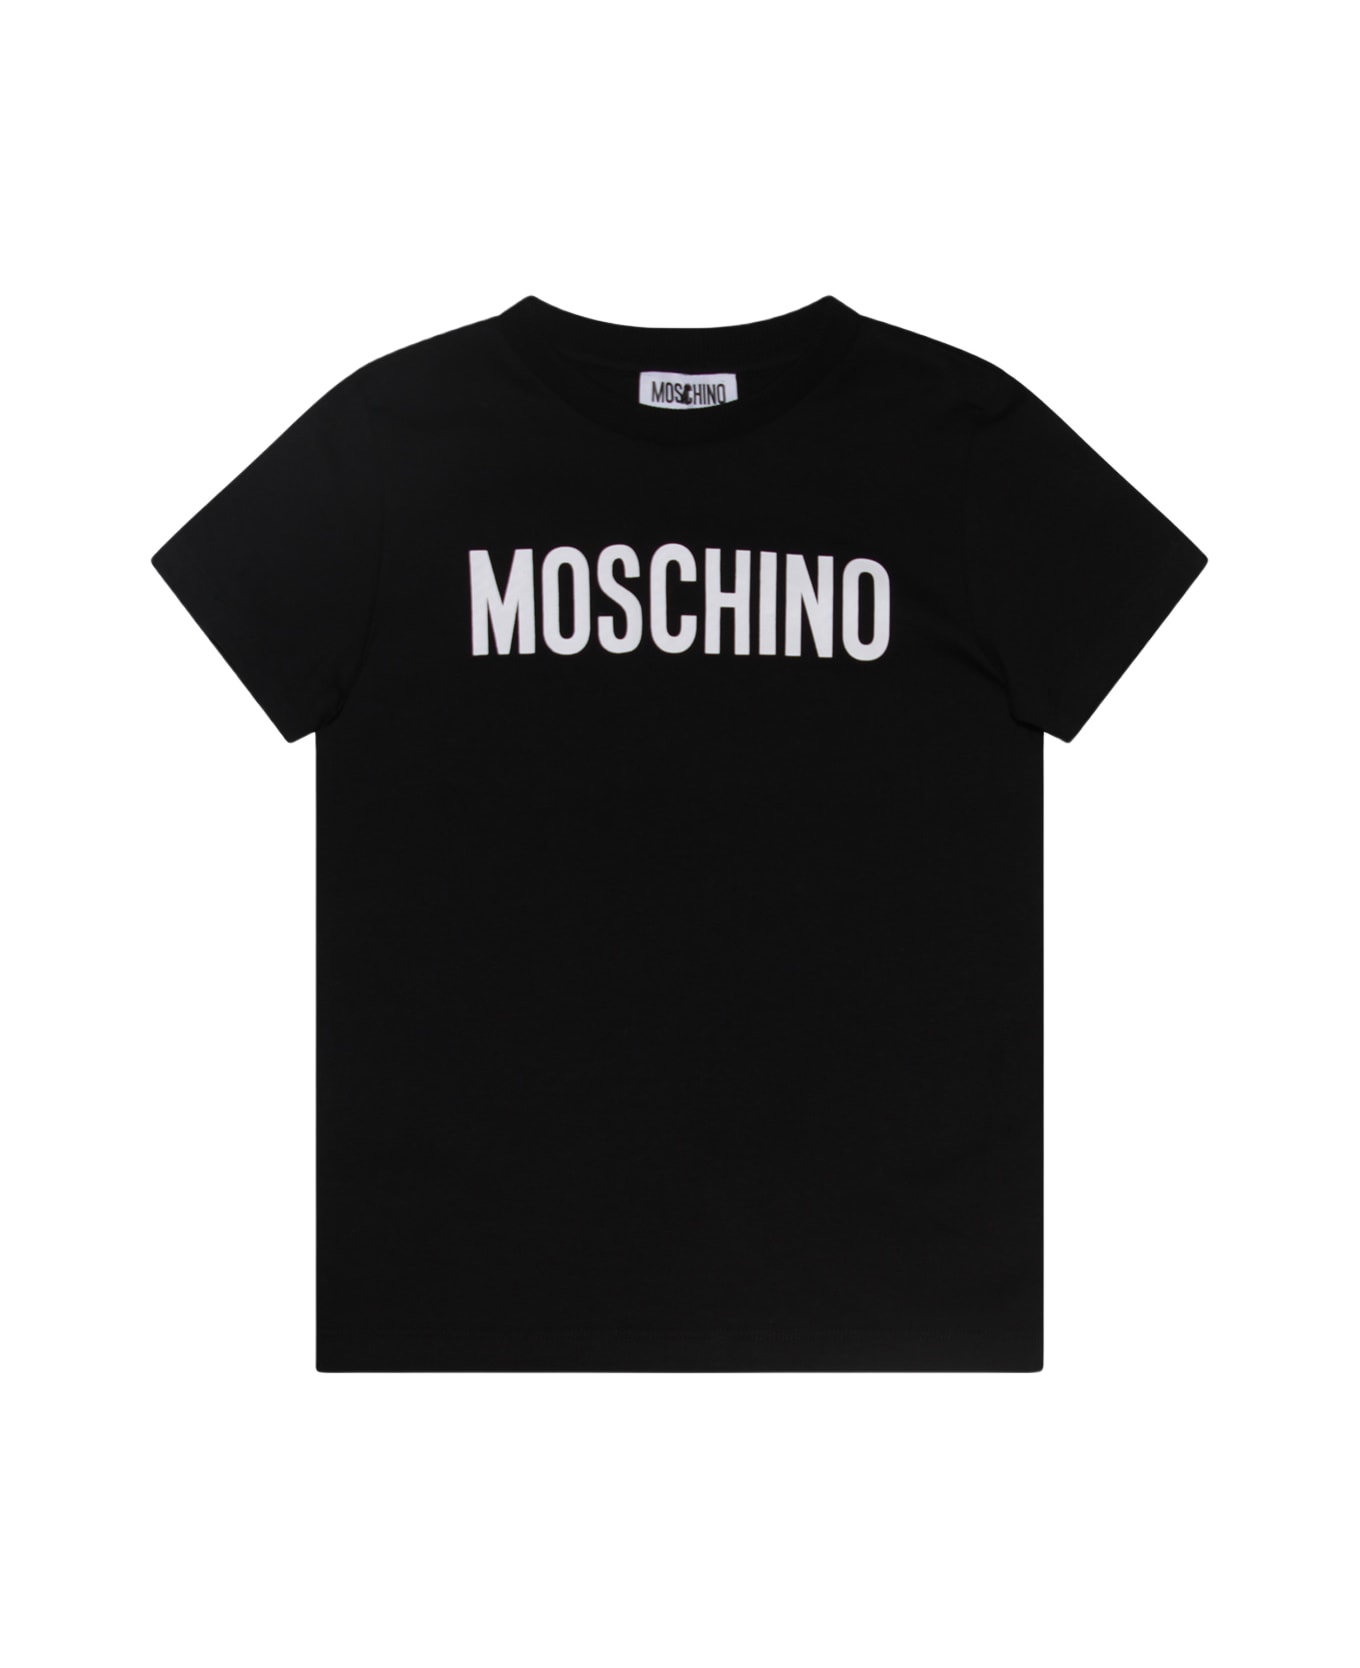 Moschino Black And White Cotton T-shirt - Black Tシャツ＆ポロシャツ